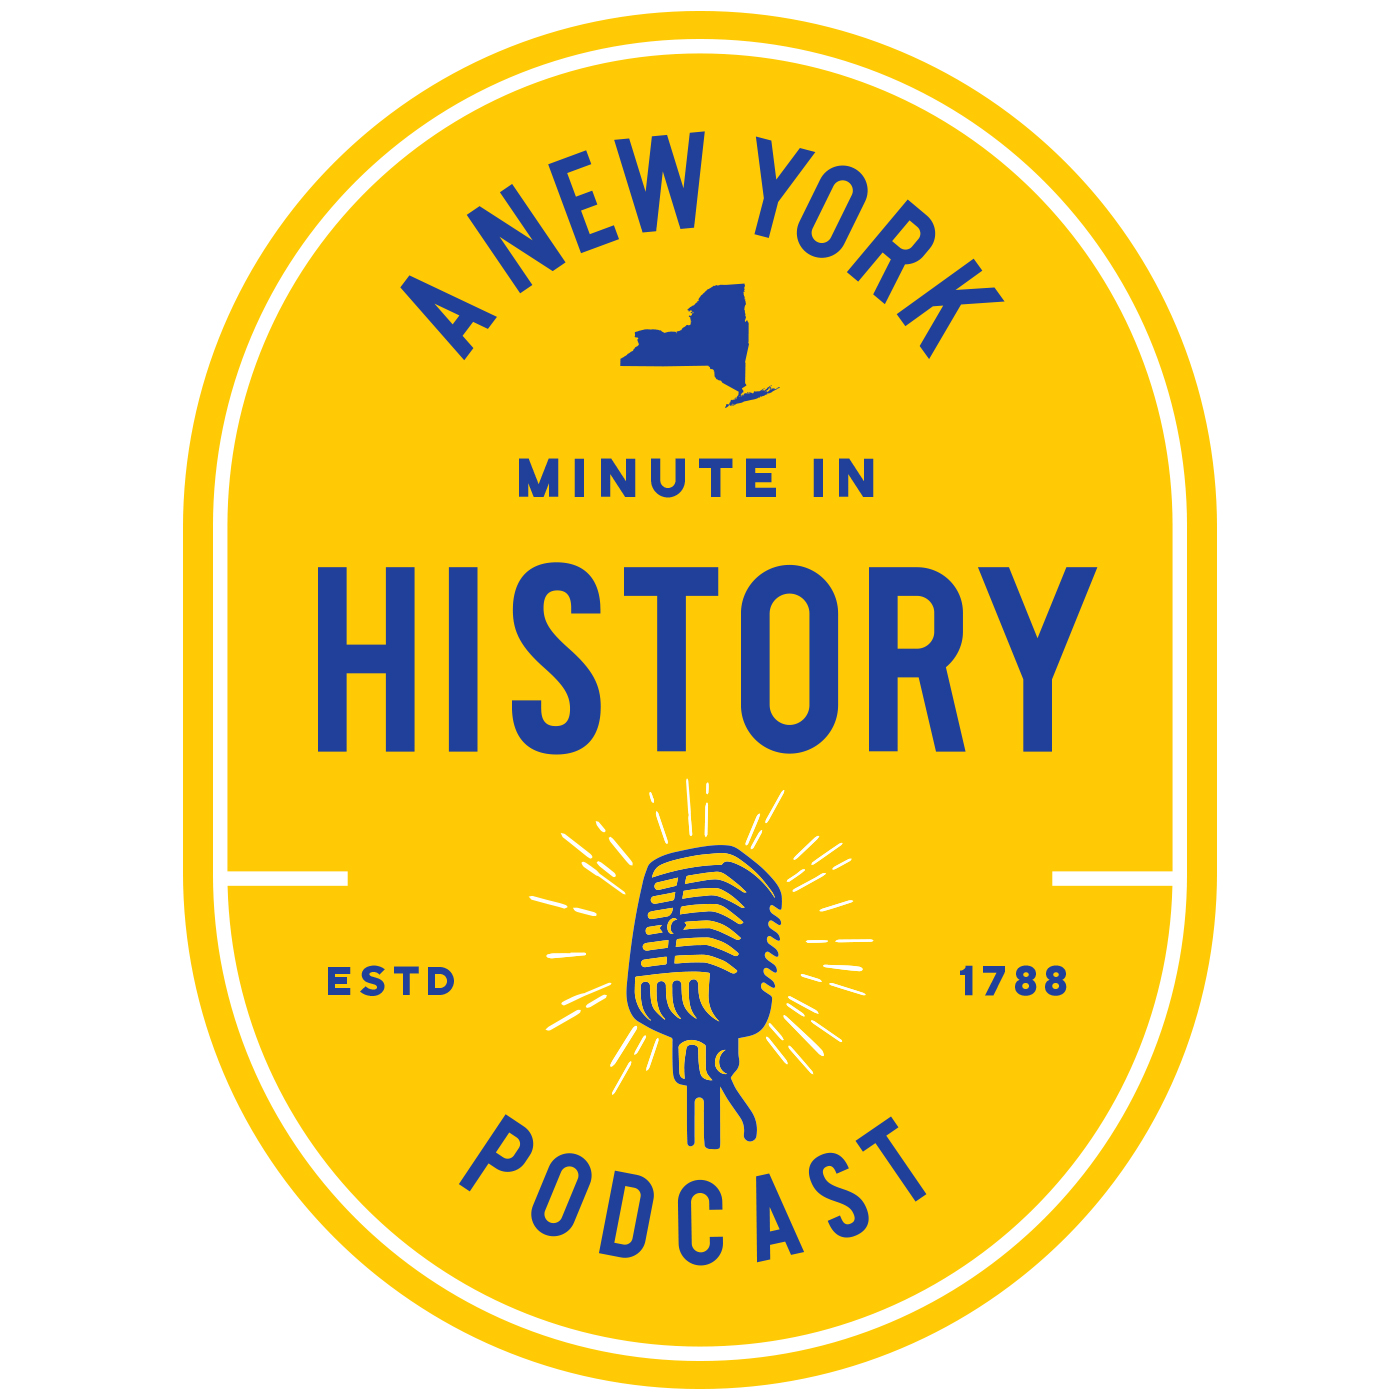 Radio Cloak and Dagger | A New York Minute in History